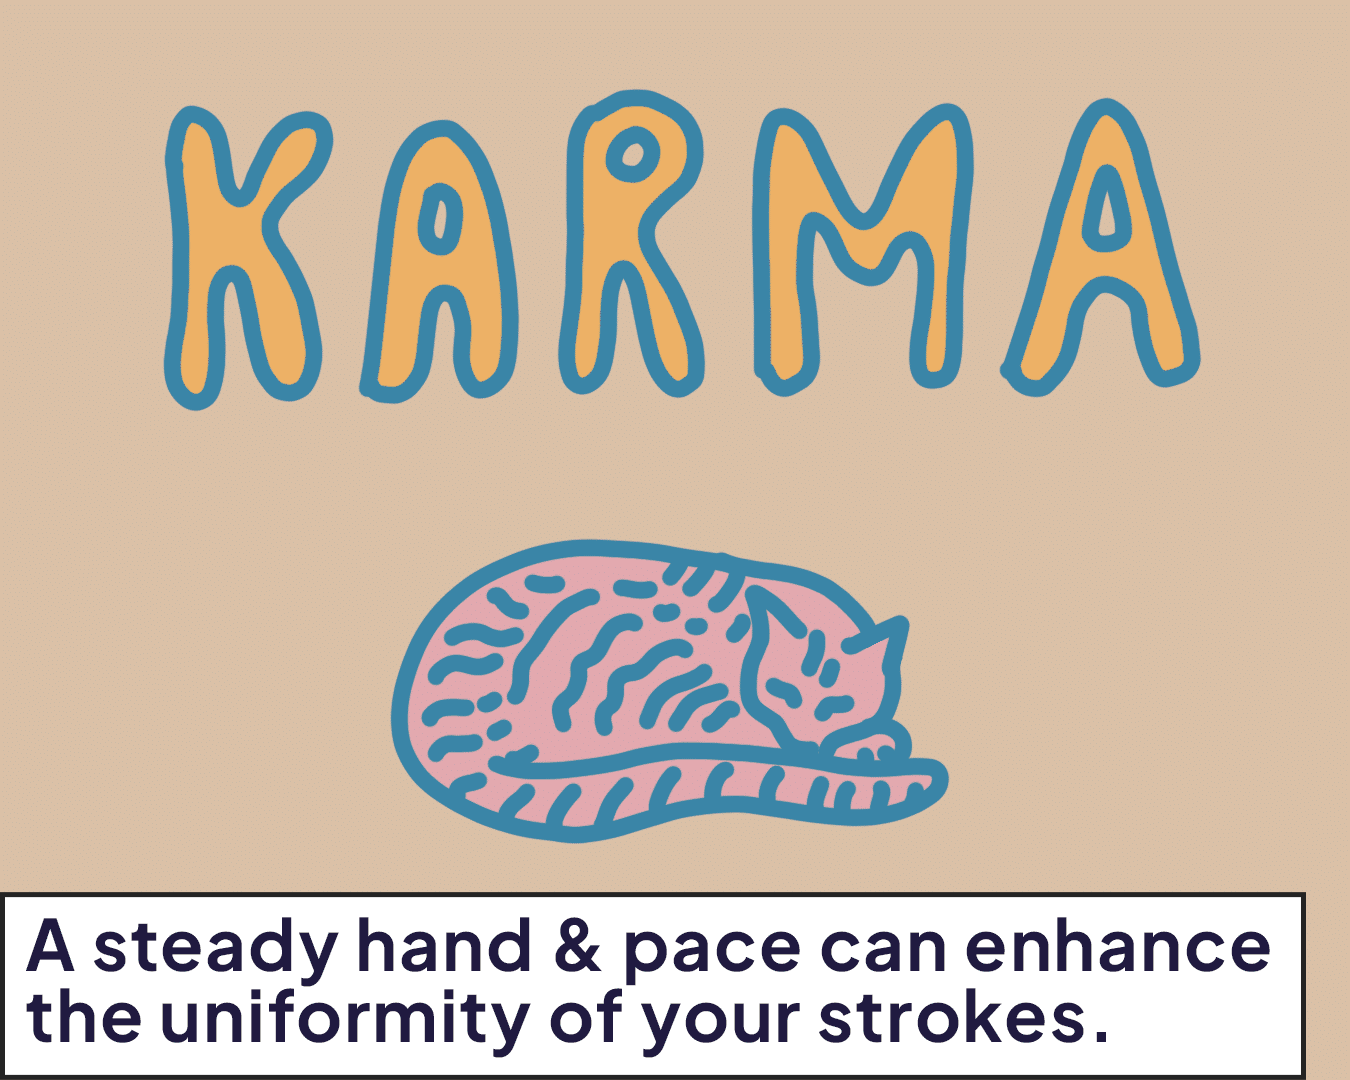 Enhancing the uniformity of your strokes